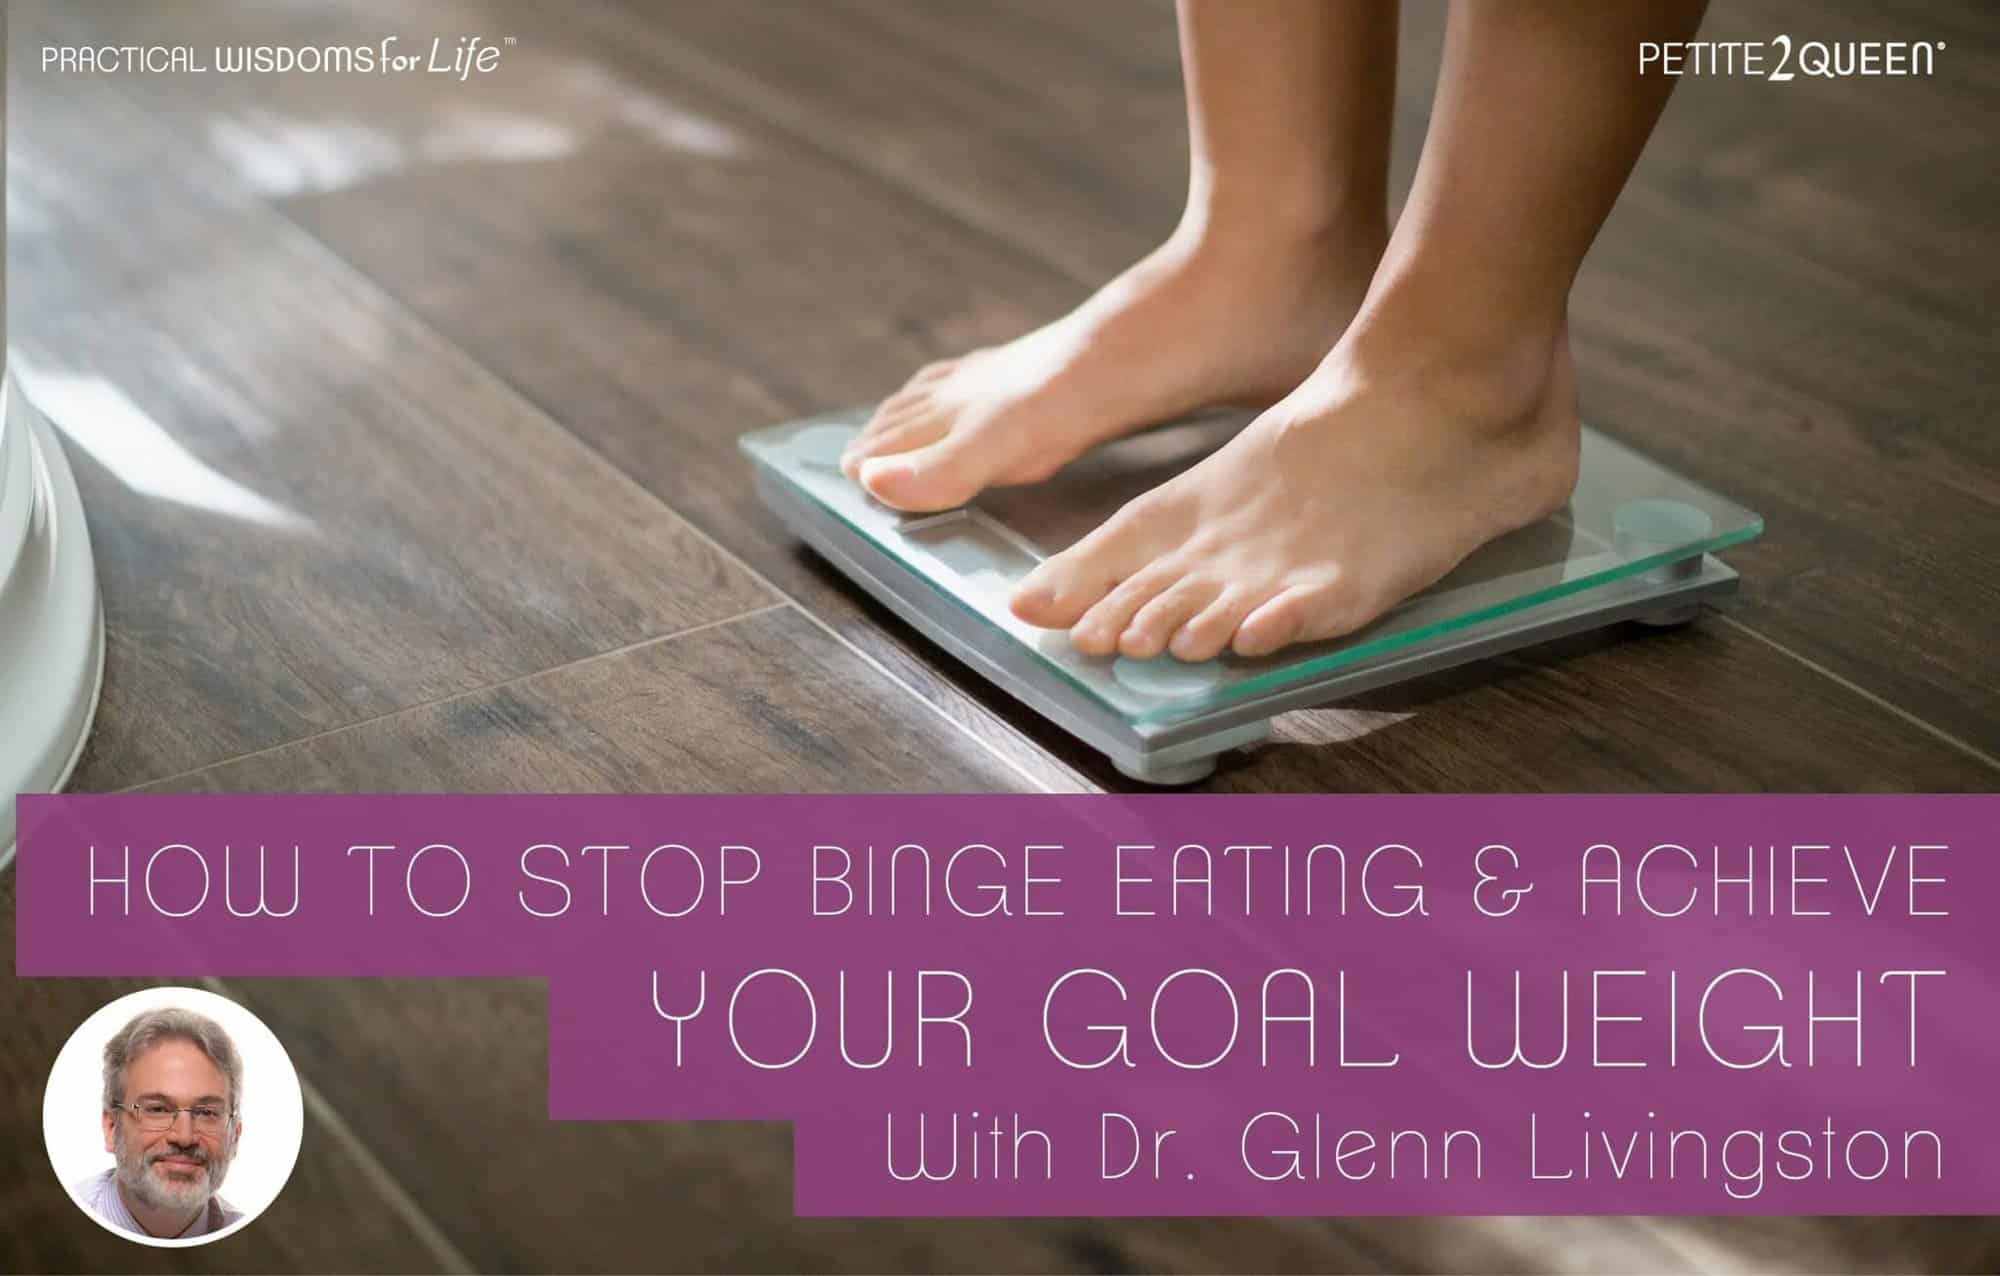 How to Stop Binge Eating and Achieve Your Goal Weight - Dr. Glenn Livingston